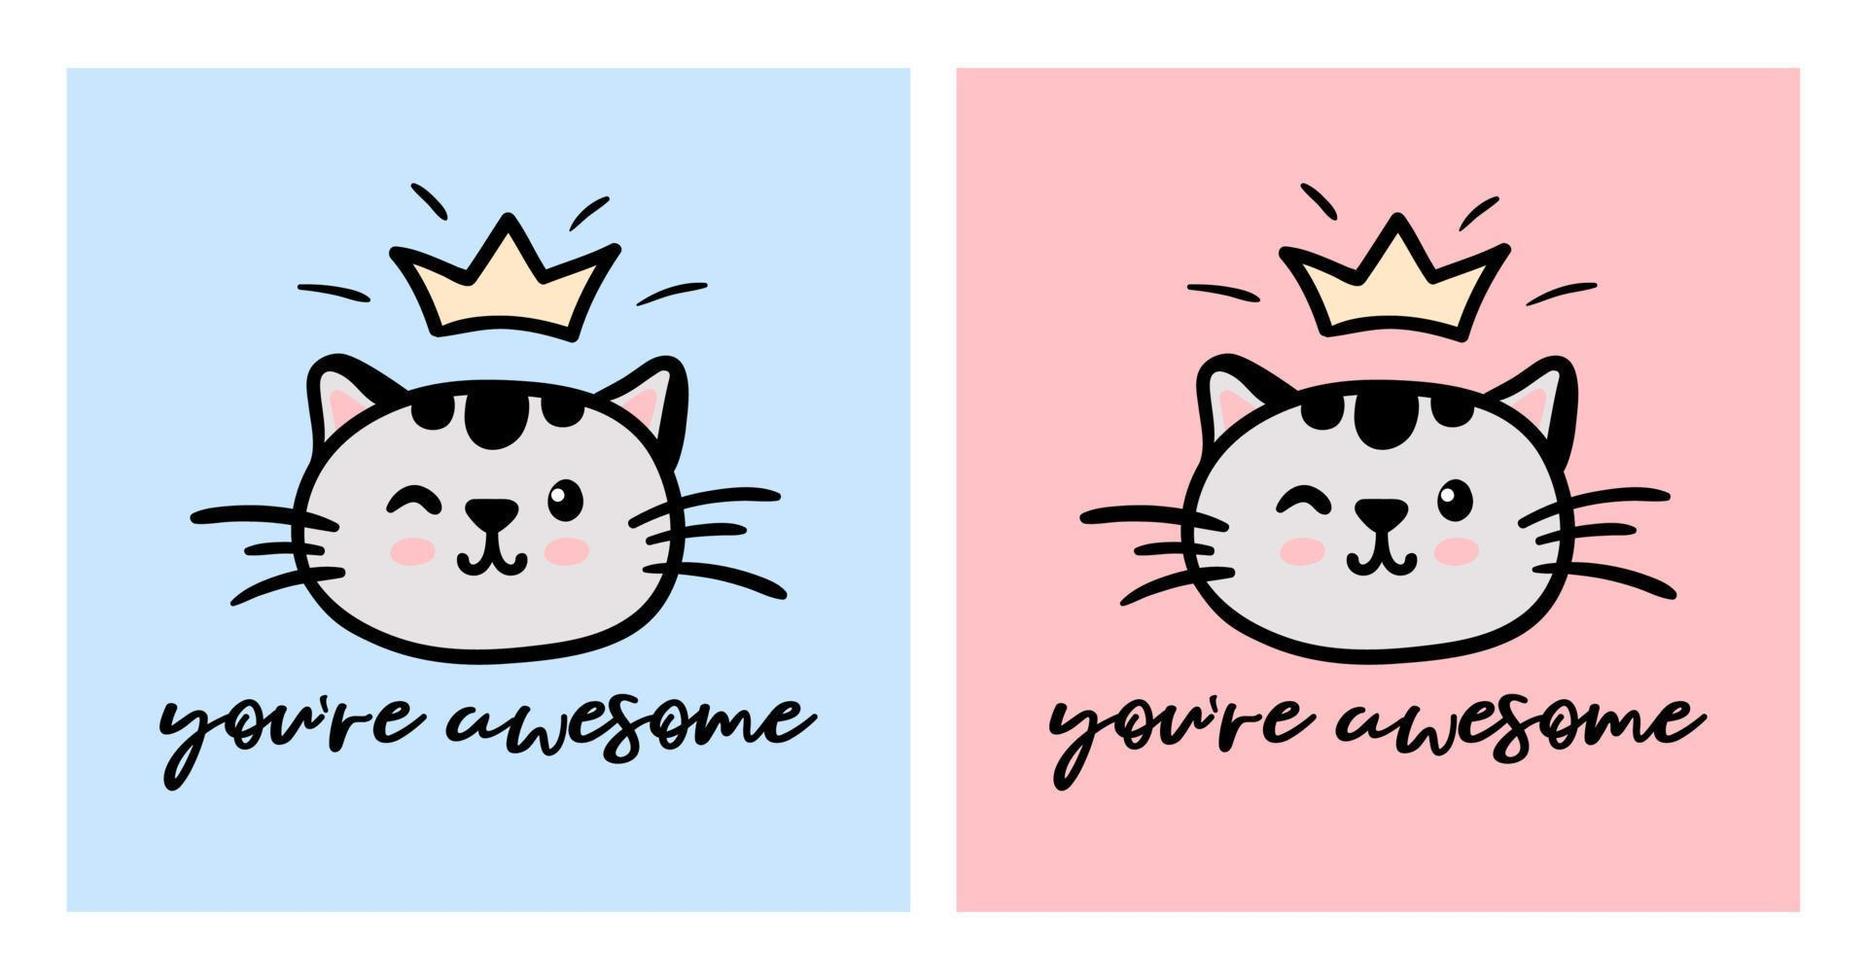 Set of two cute cat faces with crown vector doodle illustration isolated on blue or pink background with inspirational lettering you are awesome. Children baby nursery poster, greeting card